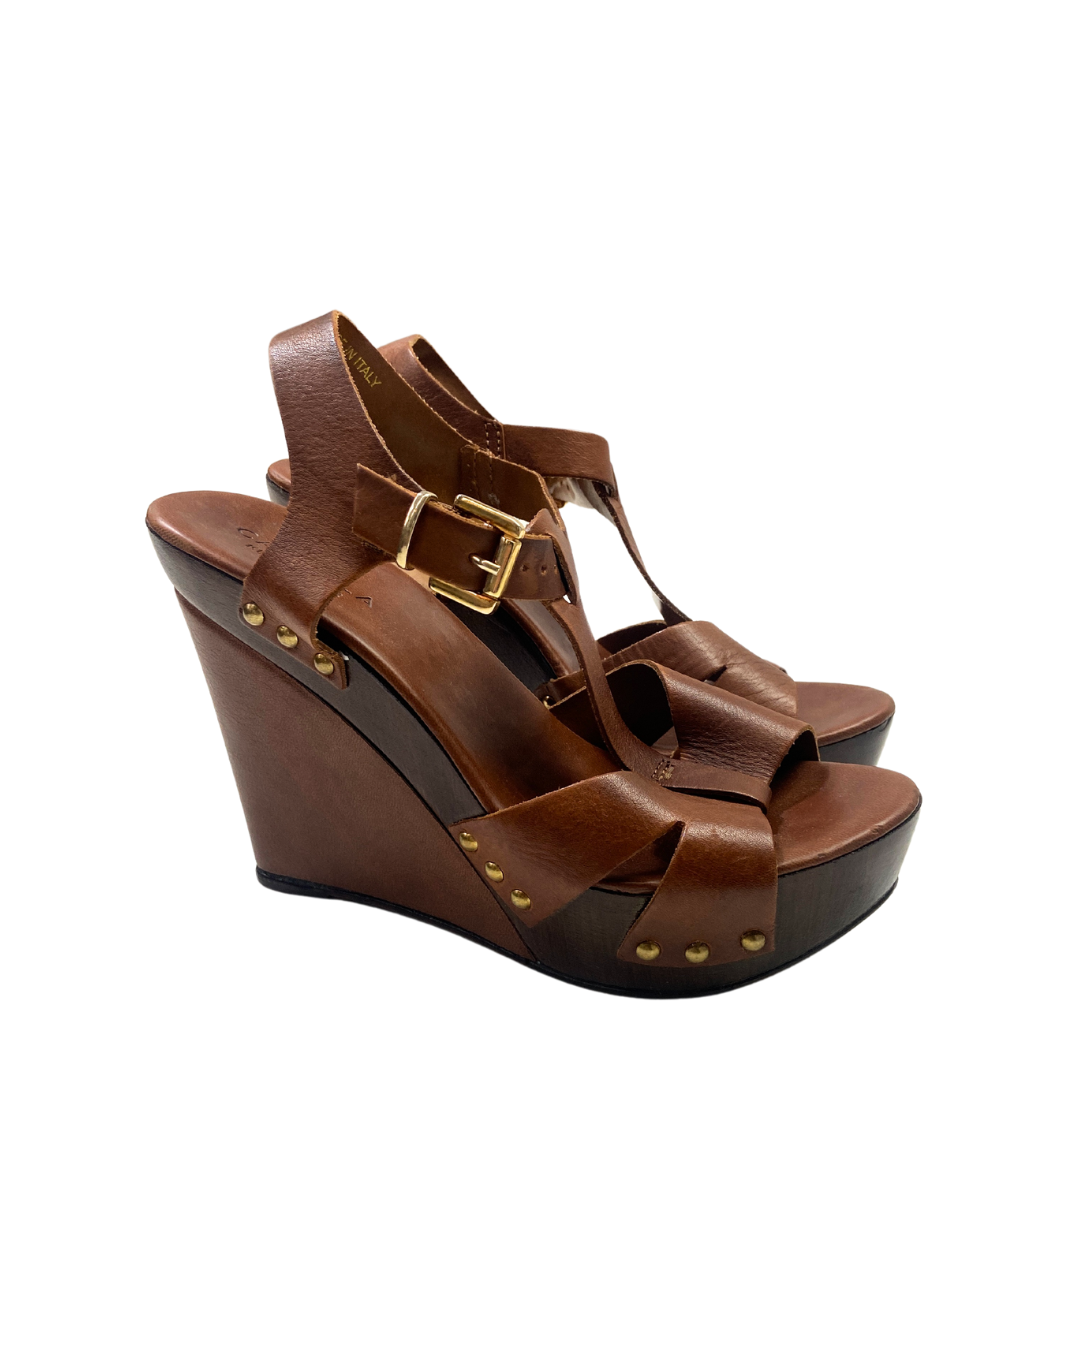 second hand Carvela Carvela Brown Leather Wedge Sandals with Gold Stud Detailing 12 OWNI